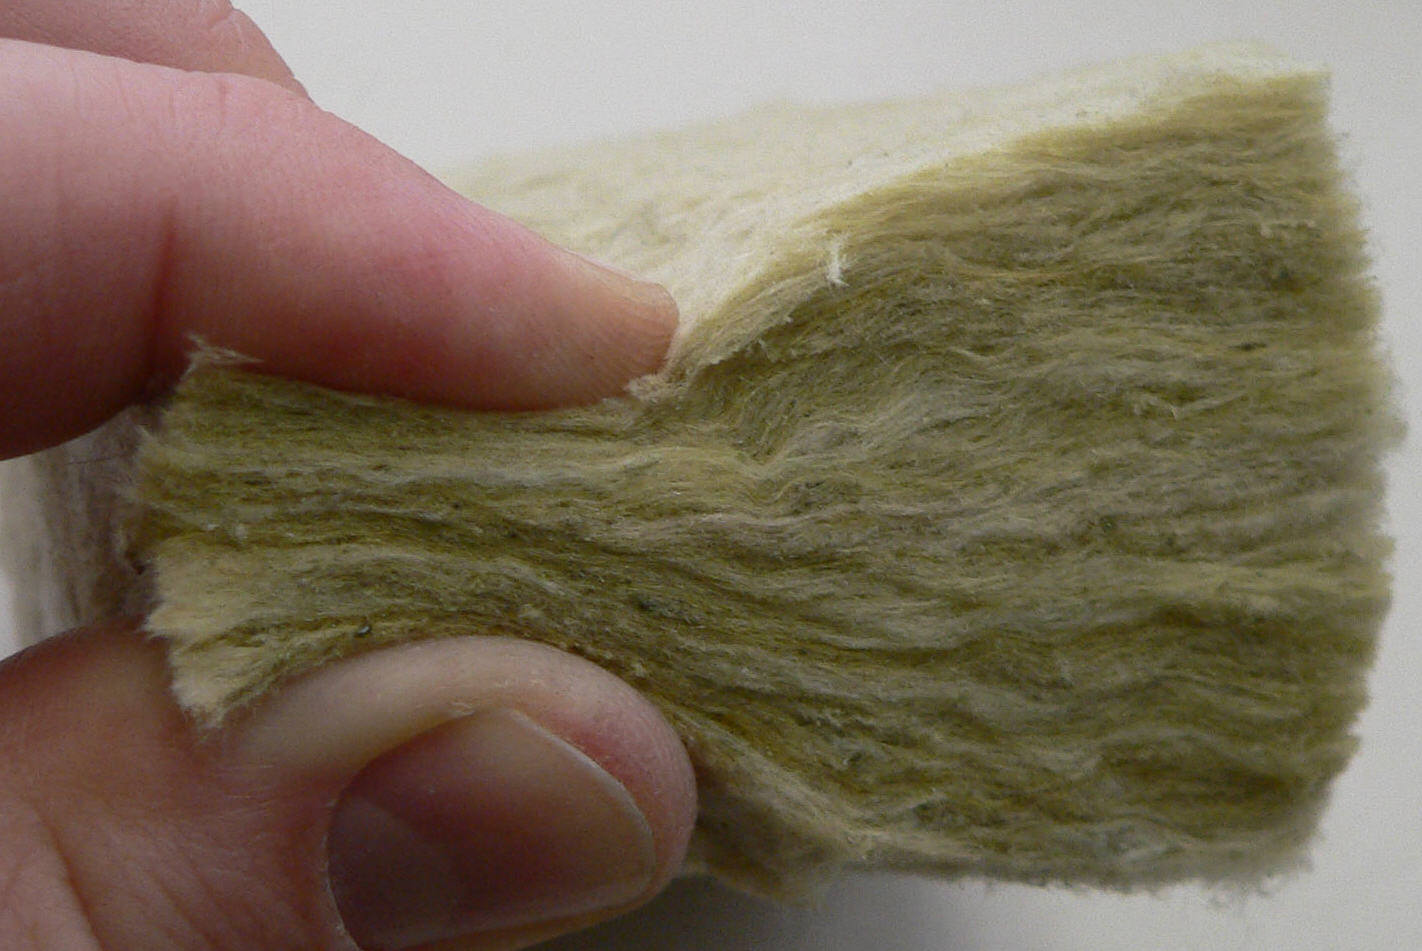 Humans use materials such as artificial rock wool, which mimics the texture of the warm coats of animals like sheep, to insulate buildings. However, researchers from the University of Namur in Belgium